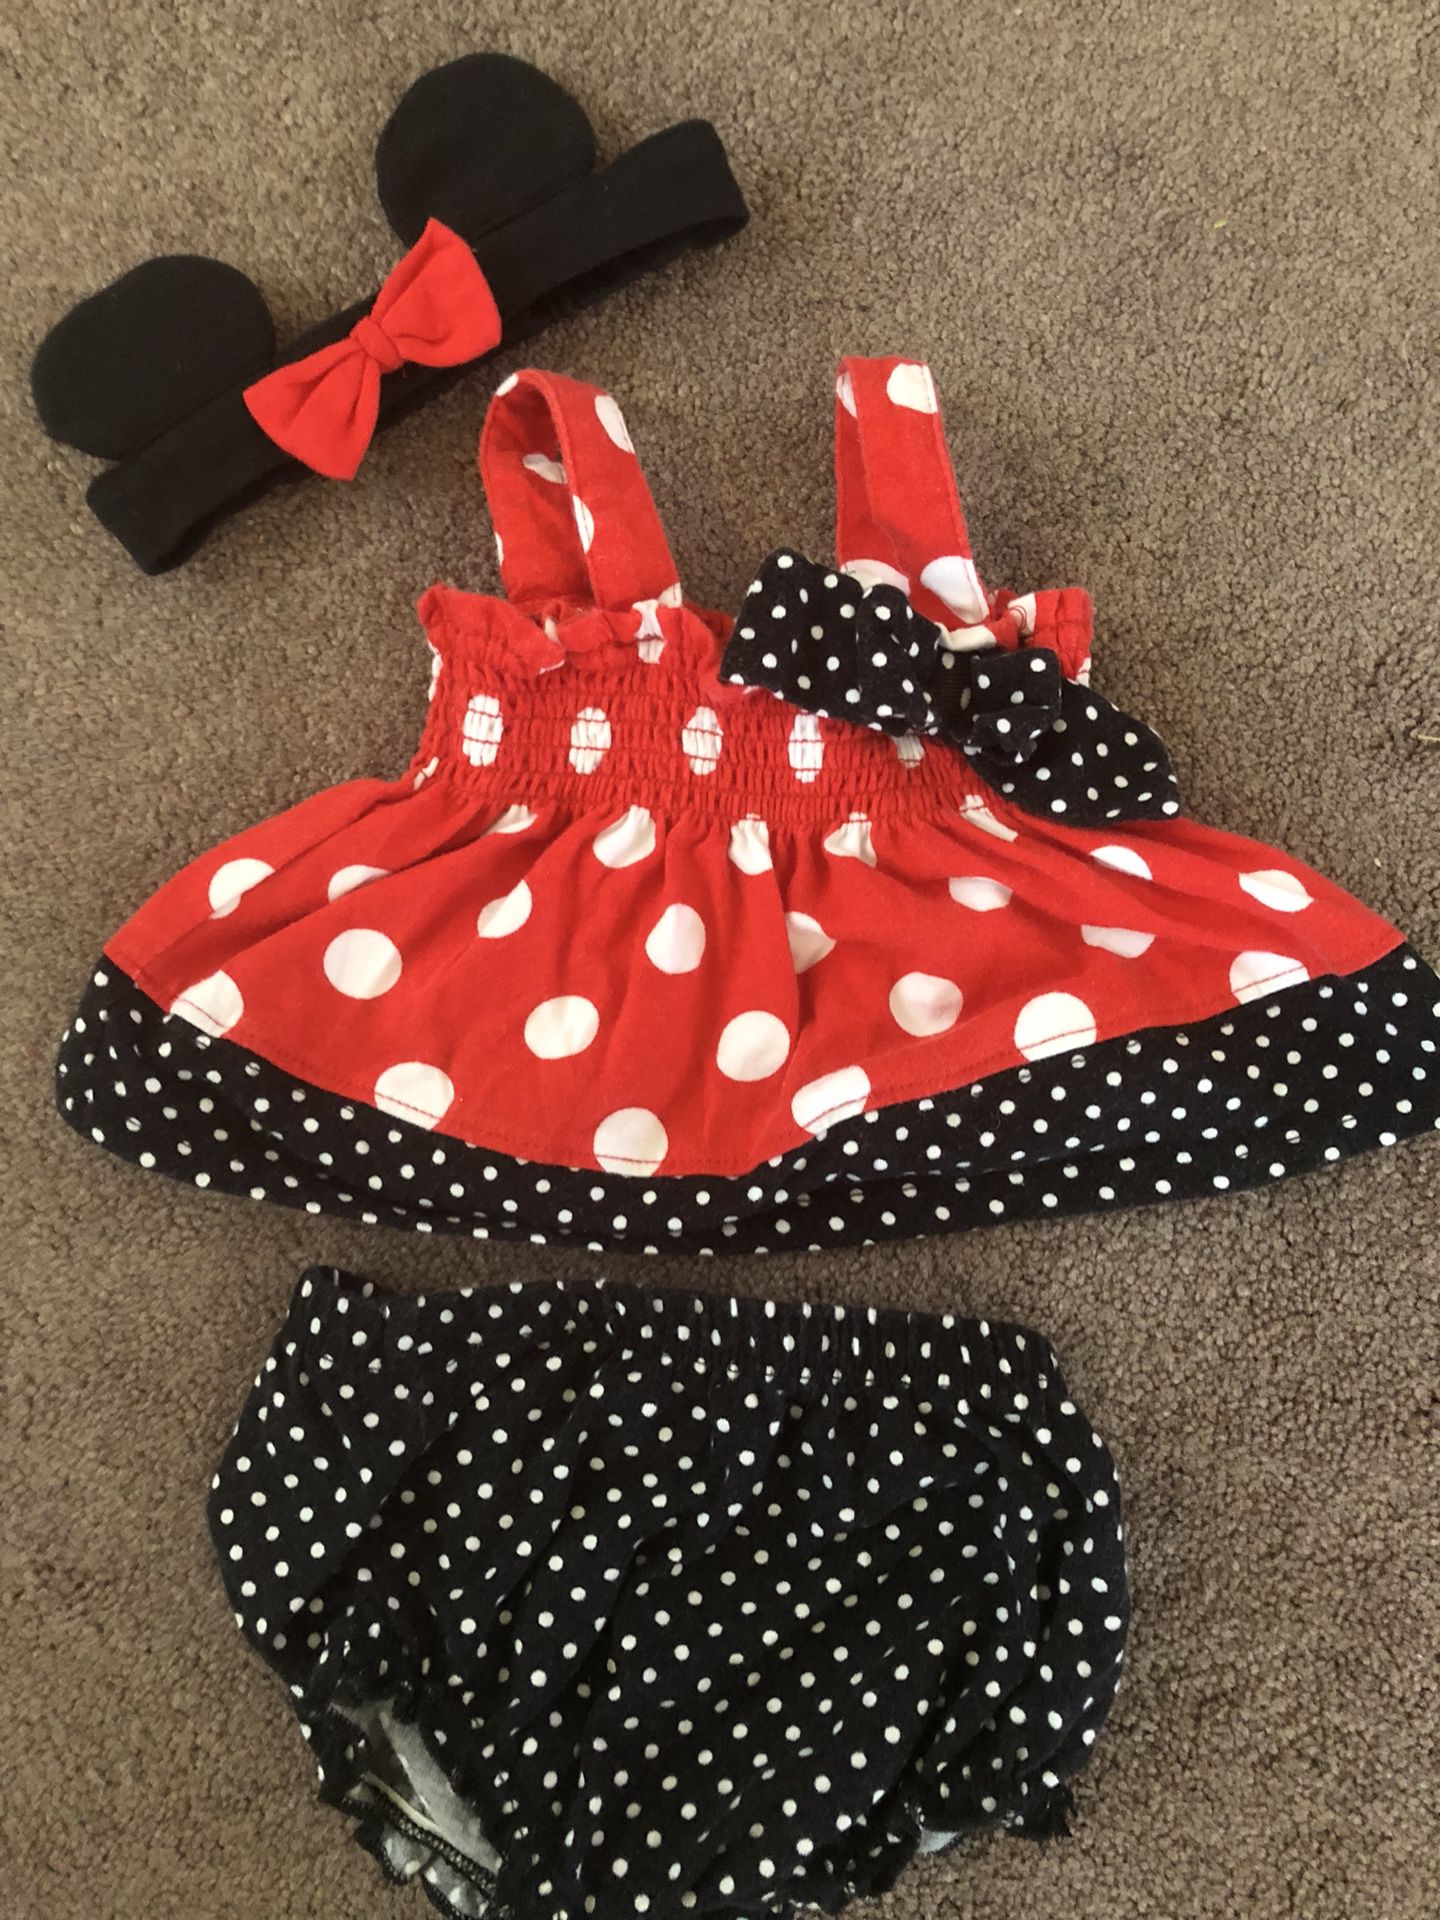 0-3 months Minnie Mouse outfit with headband